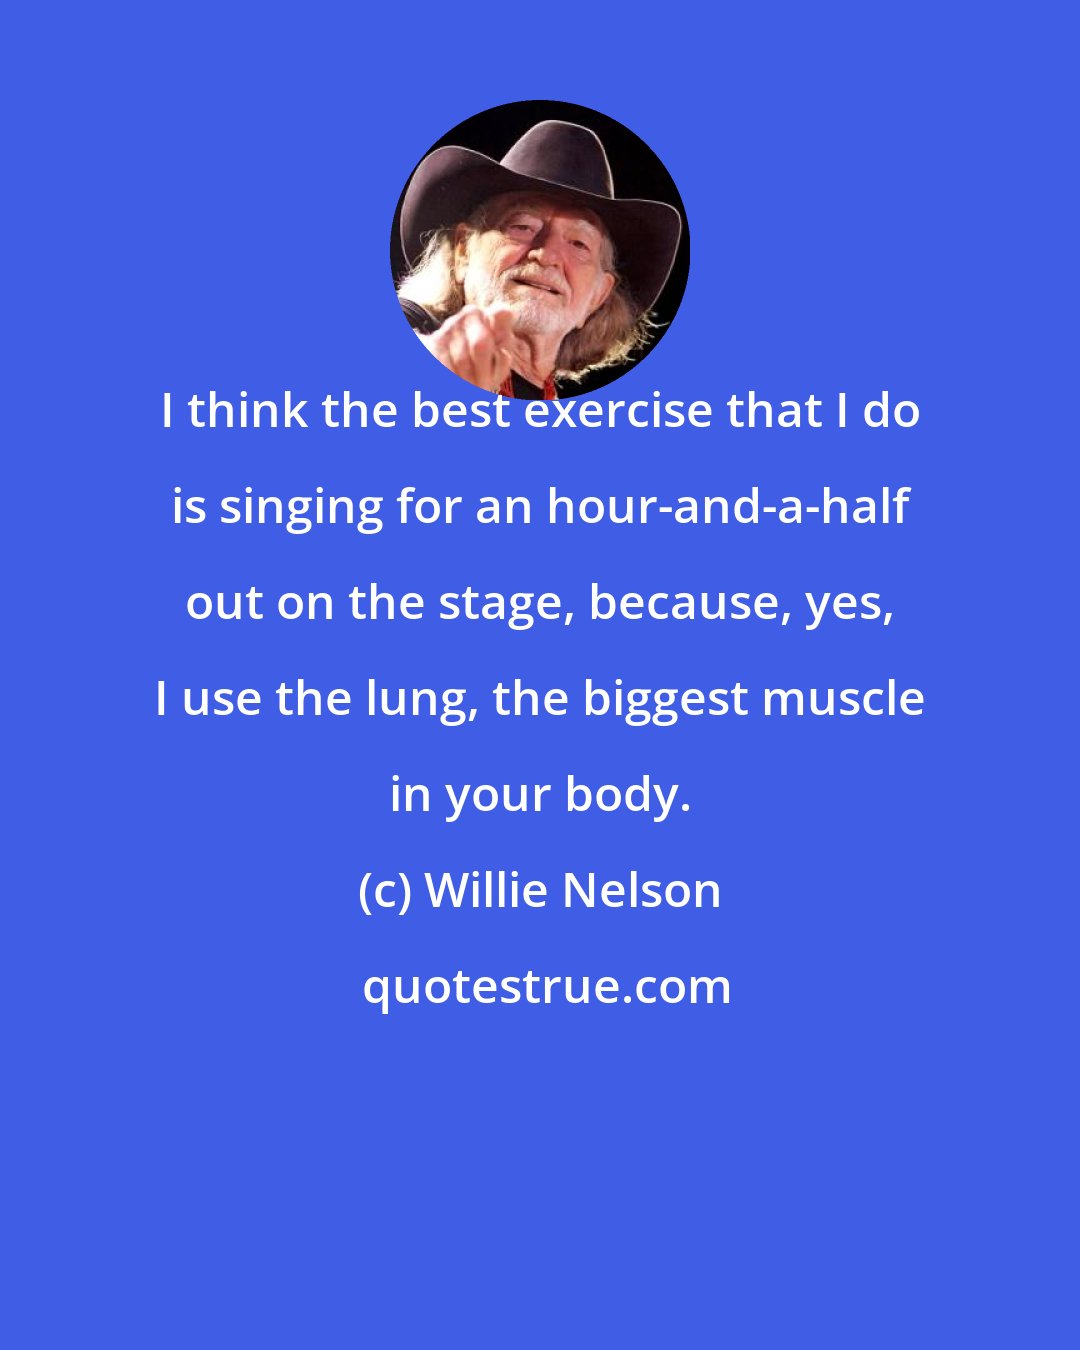 Willie Nelson: I think the best exercise that I do is singing for an hour-and-a-half out on the stage, because, yes, I use the lung, the biggest muscle in your body.